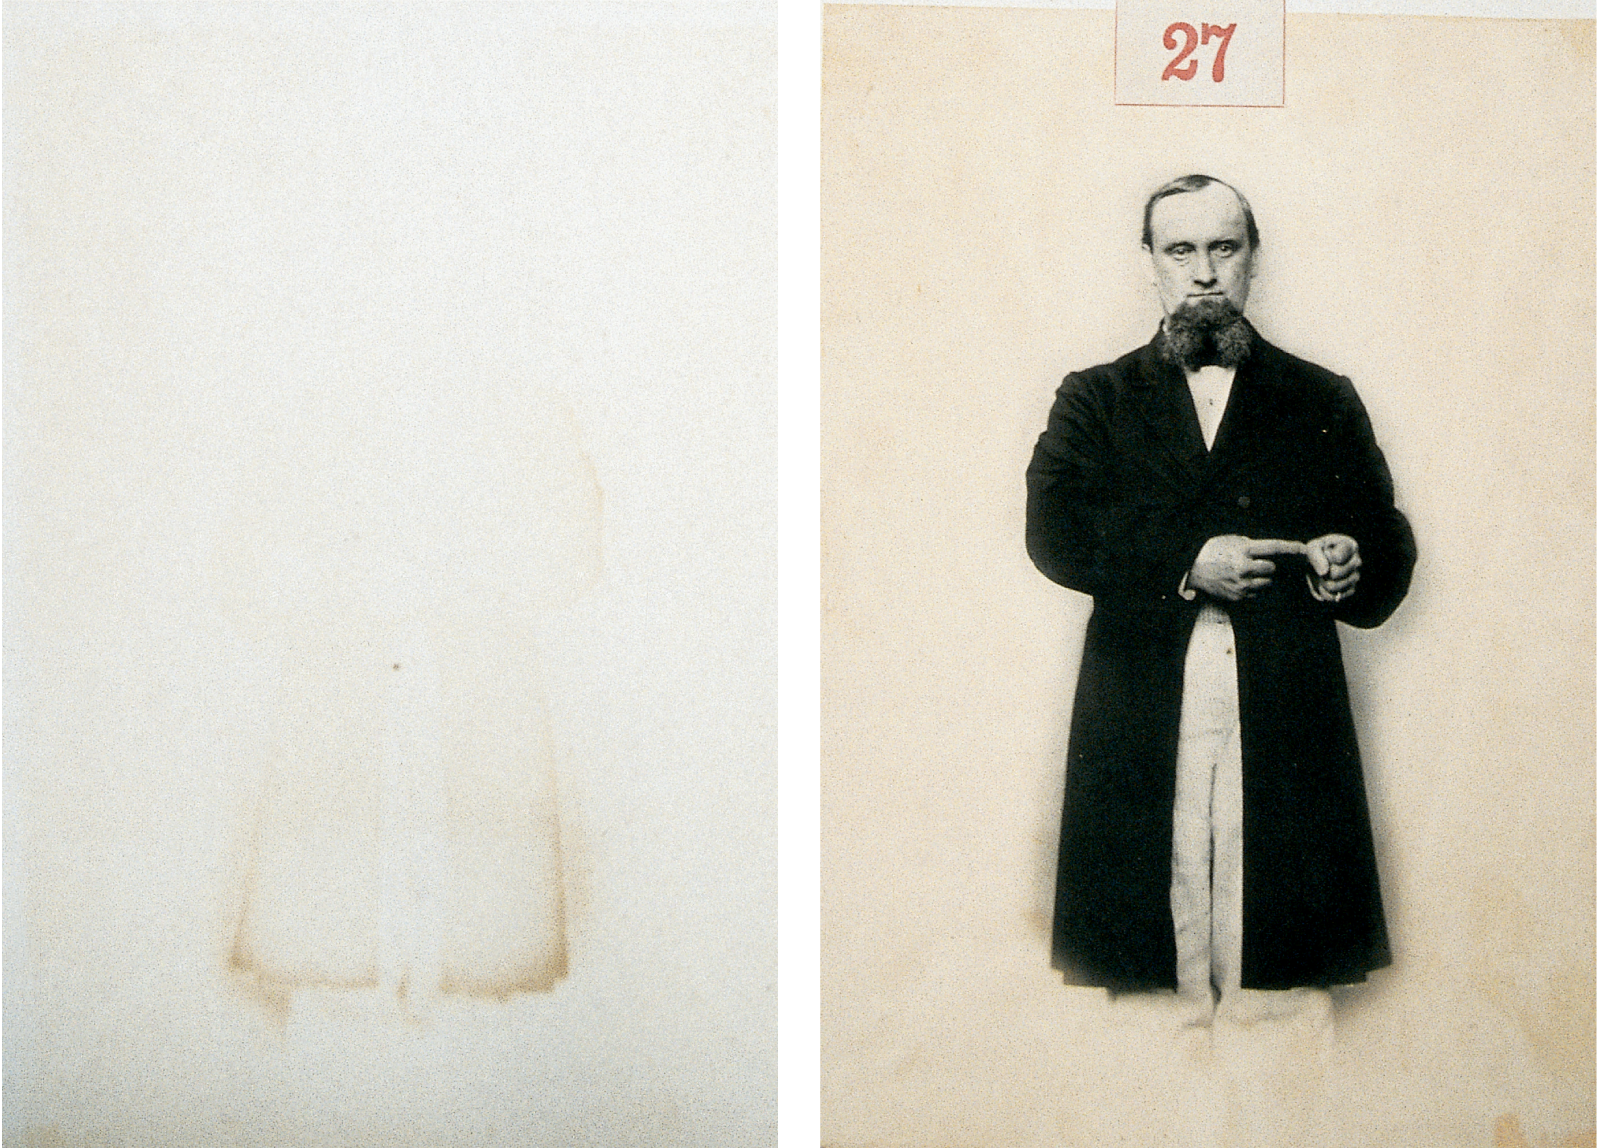 Two adjacent pages from “The Album of Unwritten Work.” On the right is a photograph depicting a man performing a secret gesture, and on the facing page is the ghostly mirror image of the man, which has been produced by a chemical reaction.